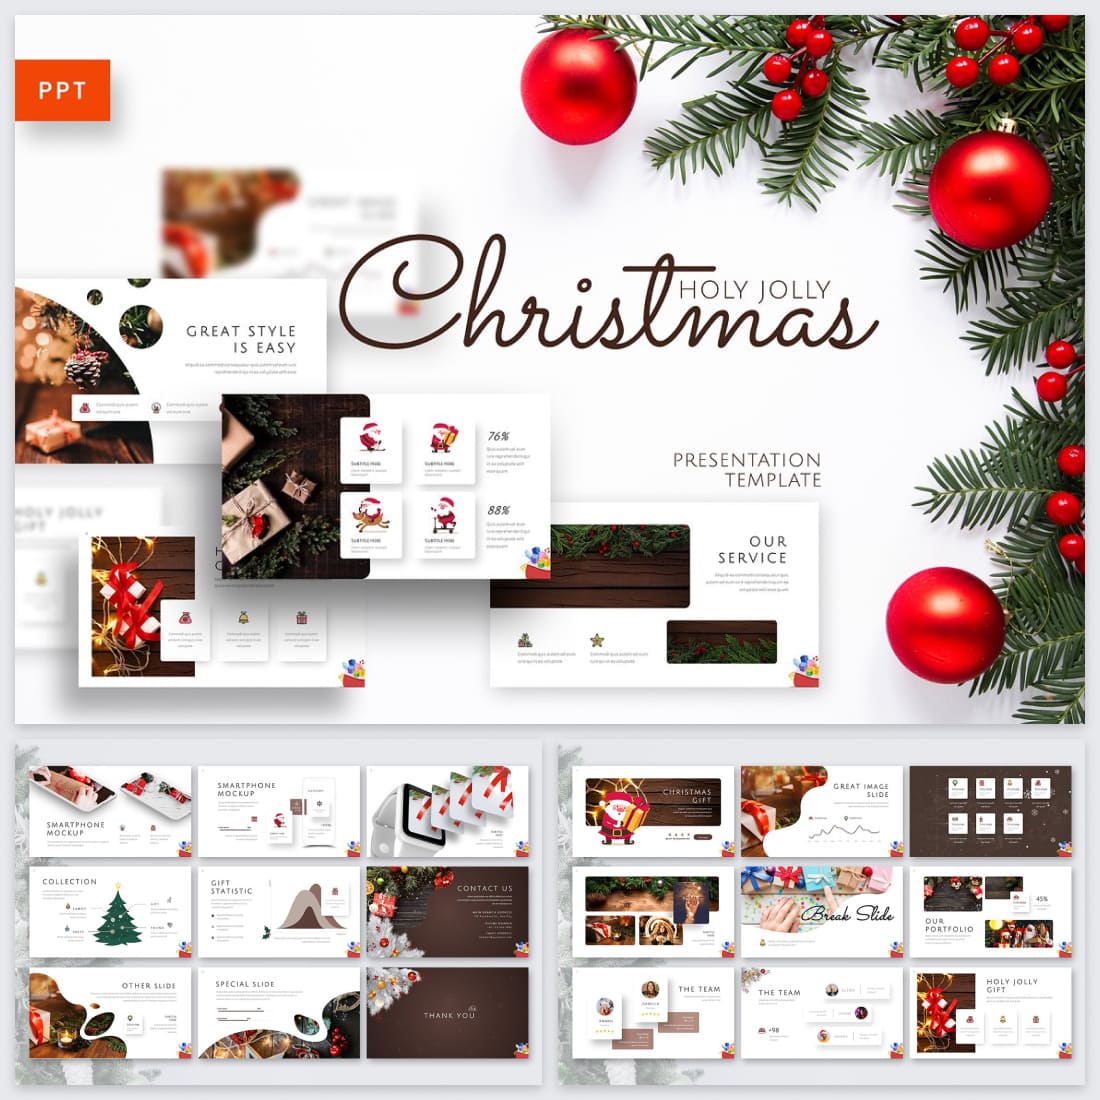 Holy Joly Christmas Template by MasterBundles.